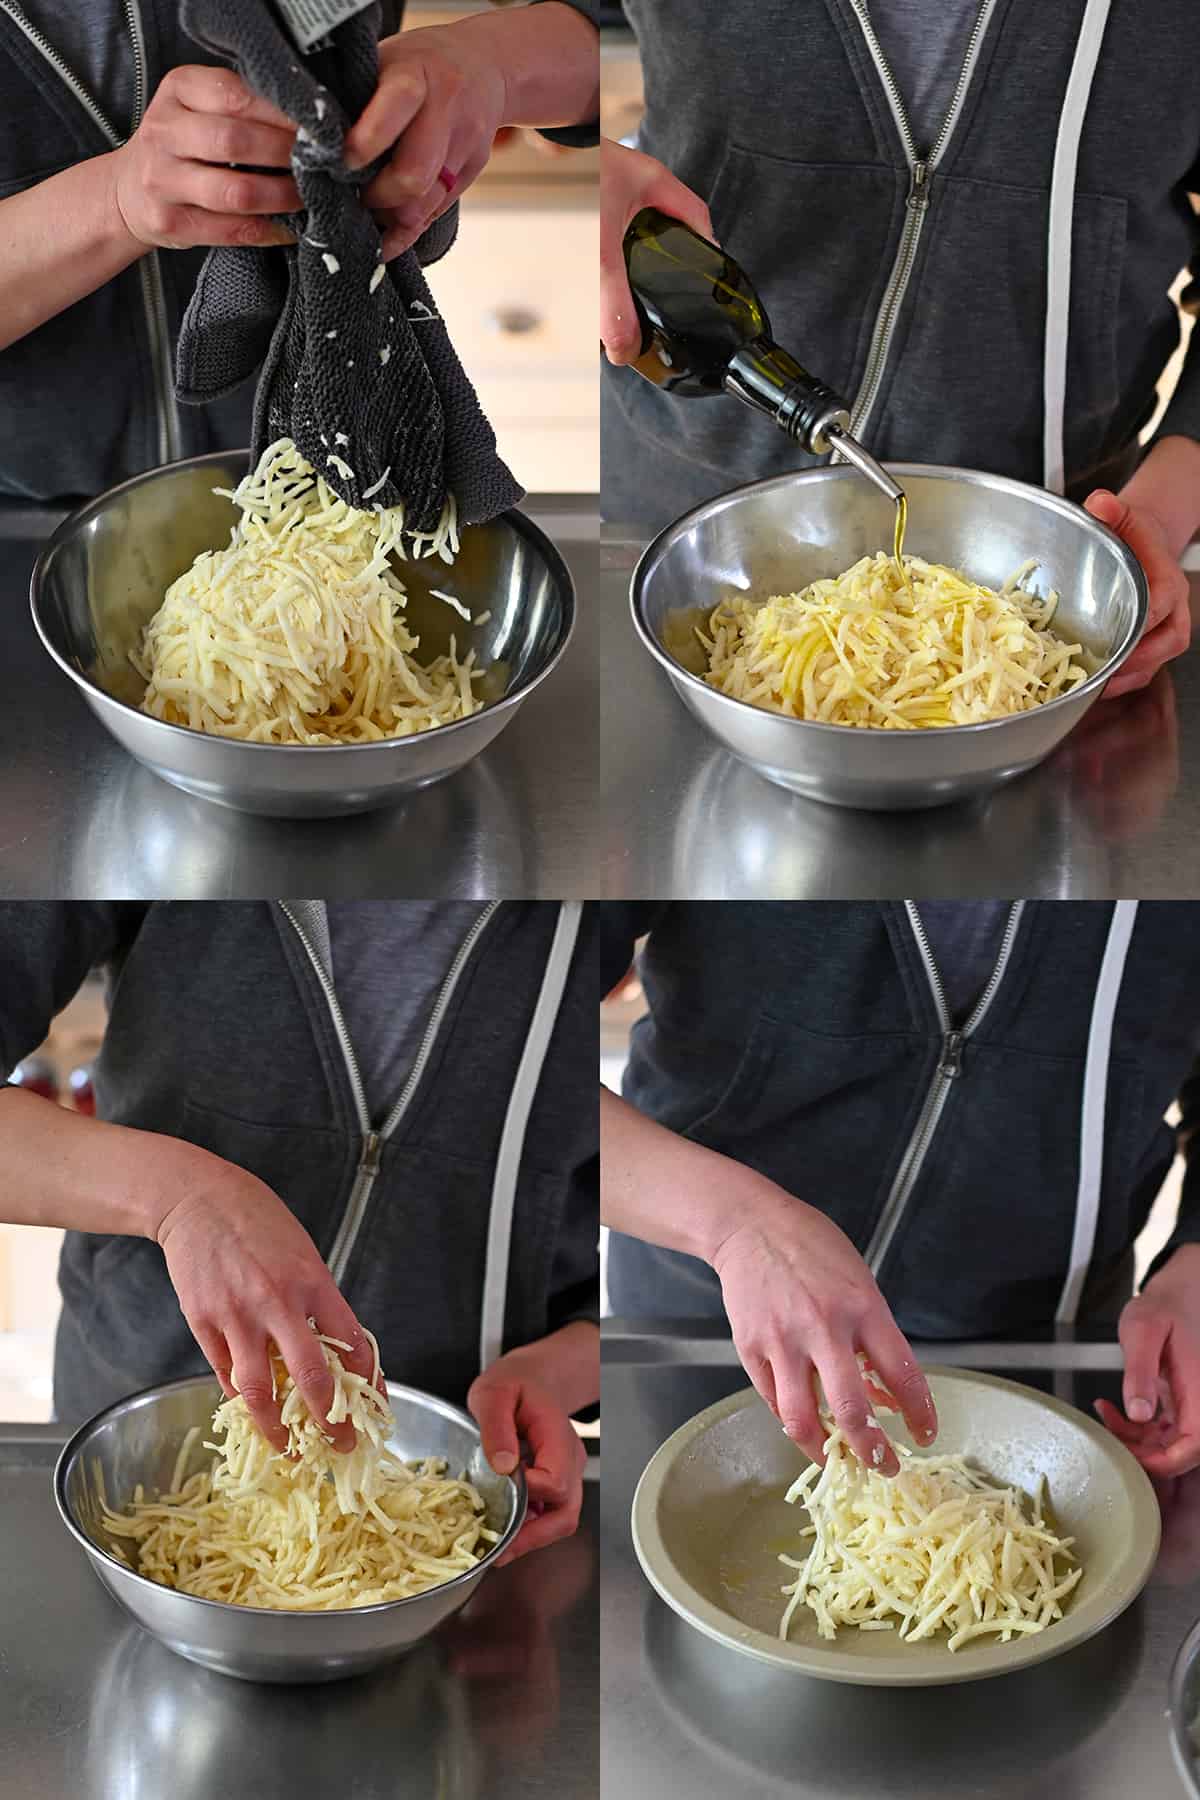 Adding extra virgin olive oil to a bowl filled with shredded potatoes and placing them in a pie pan.